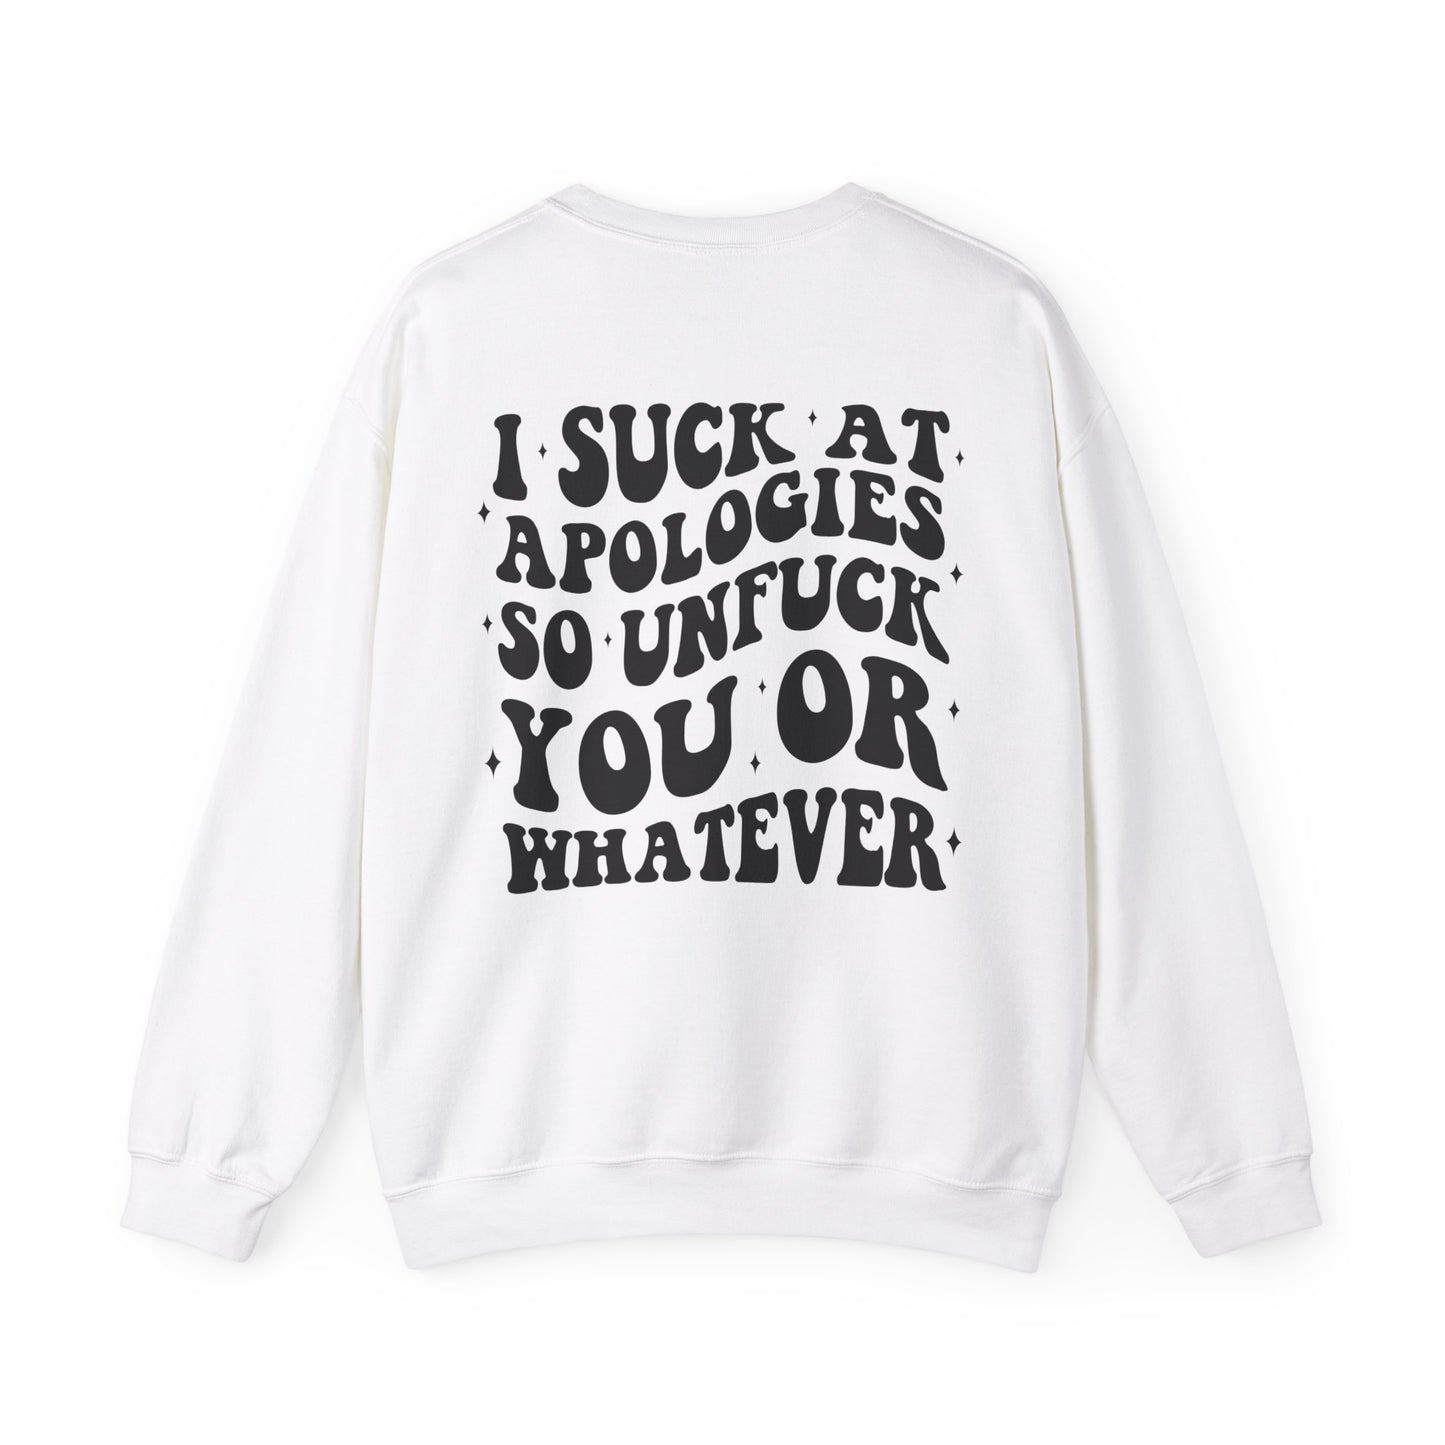 "I Suck At Apologies So Unf#ck You Or Whatever" Unisex Heavy Blend™ Crewneck Sweatshirt